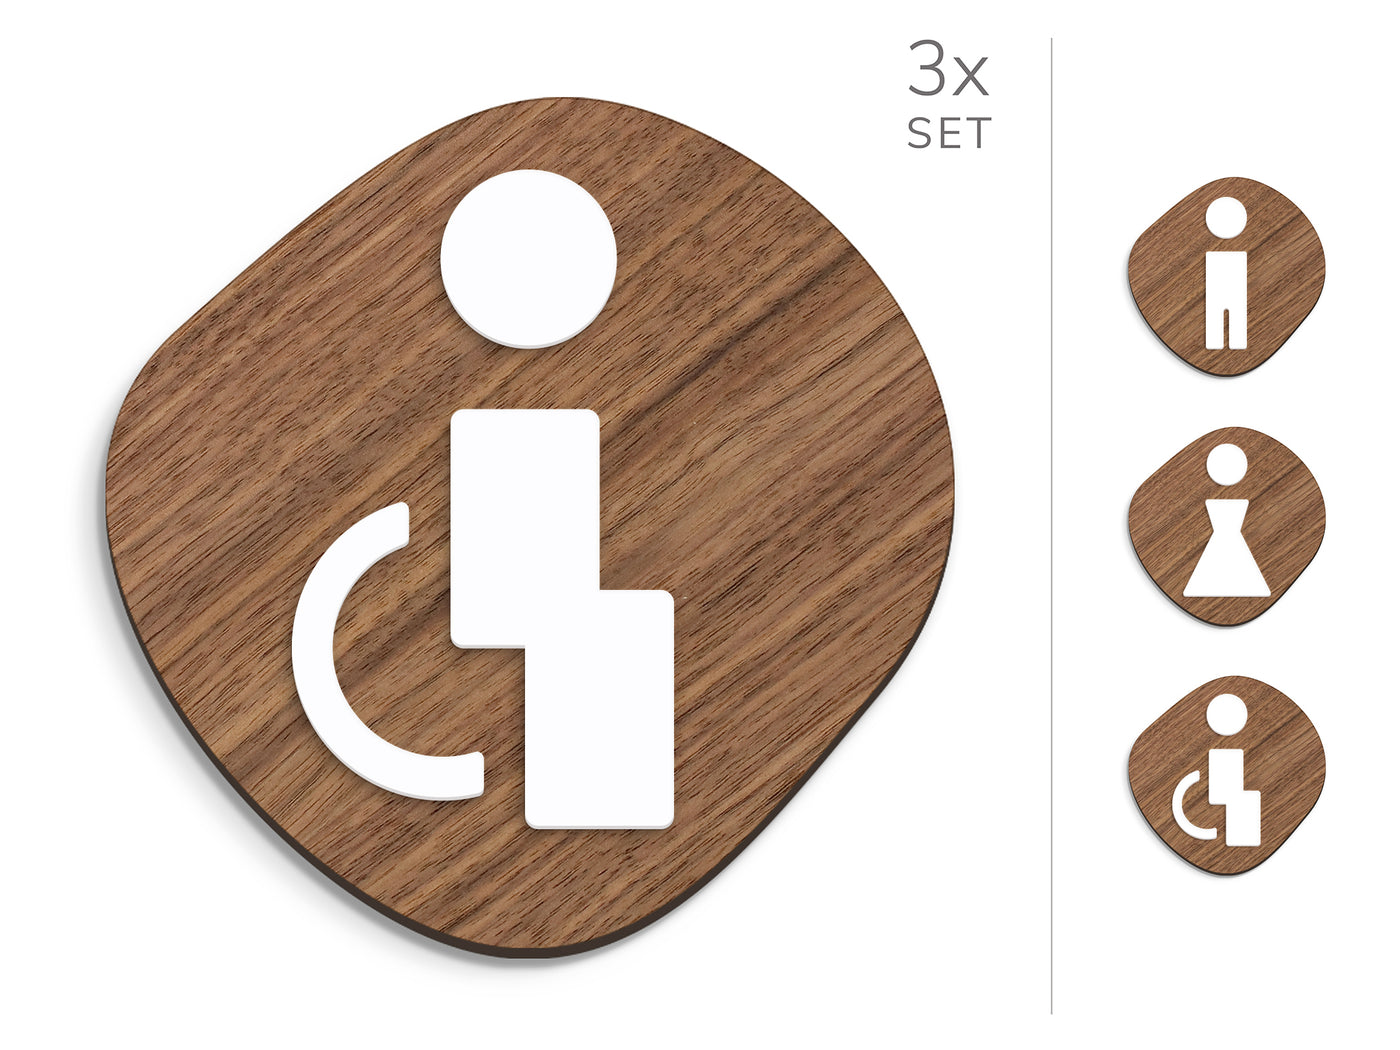 Polygonal, 3x Stone shaped Base - Restroom Signs Set - Man, Woman, Disabled